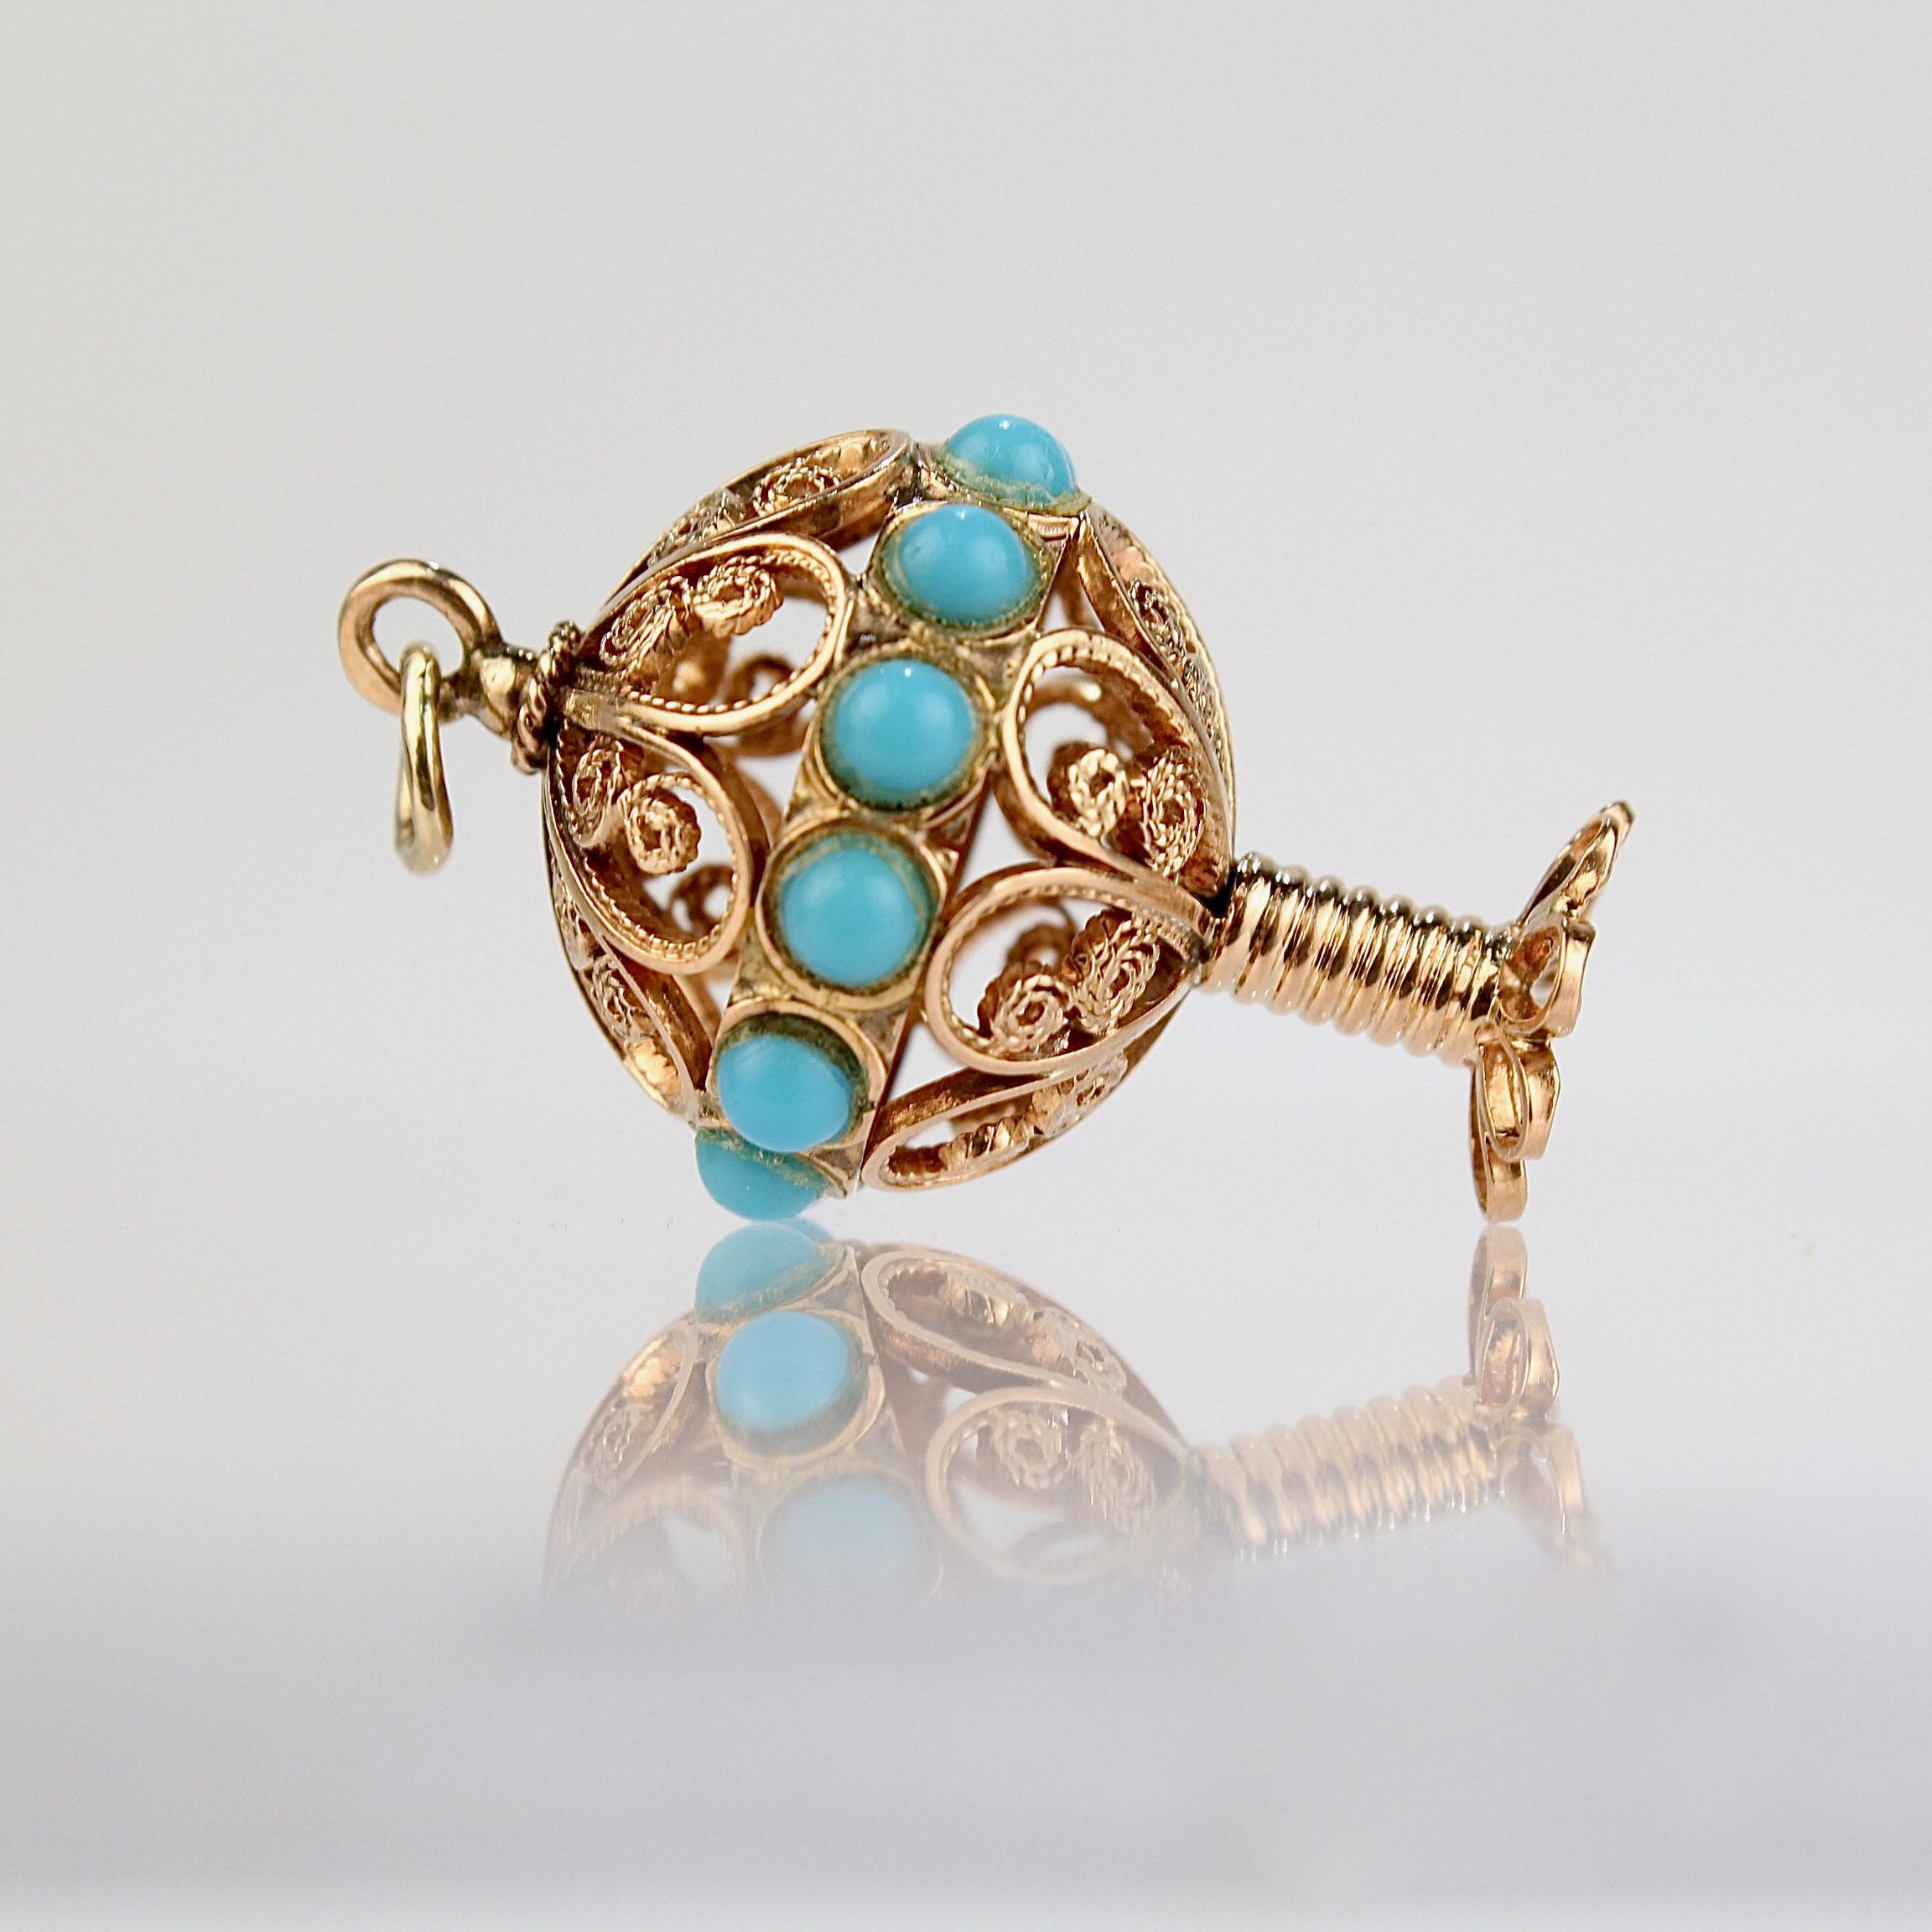 Vintage Etruscan Revival Style 18k Gold & Turquoise Charm or Pendant In Good Condition For Sale In Philadelphia, PA